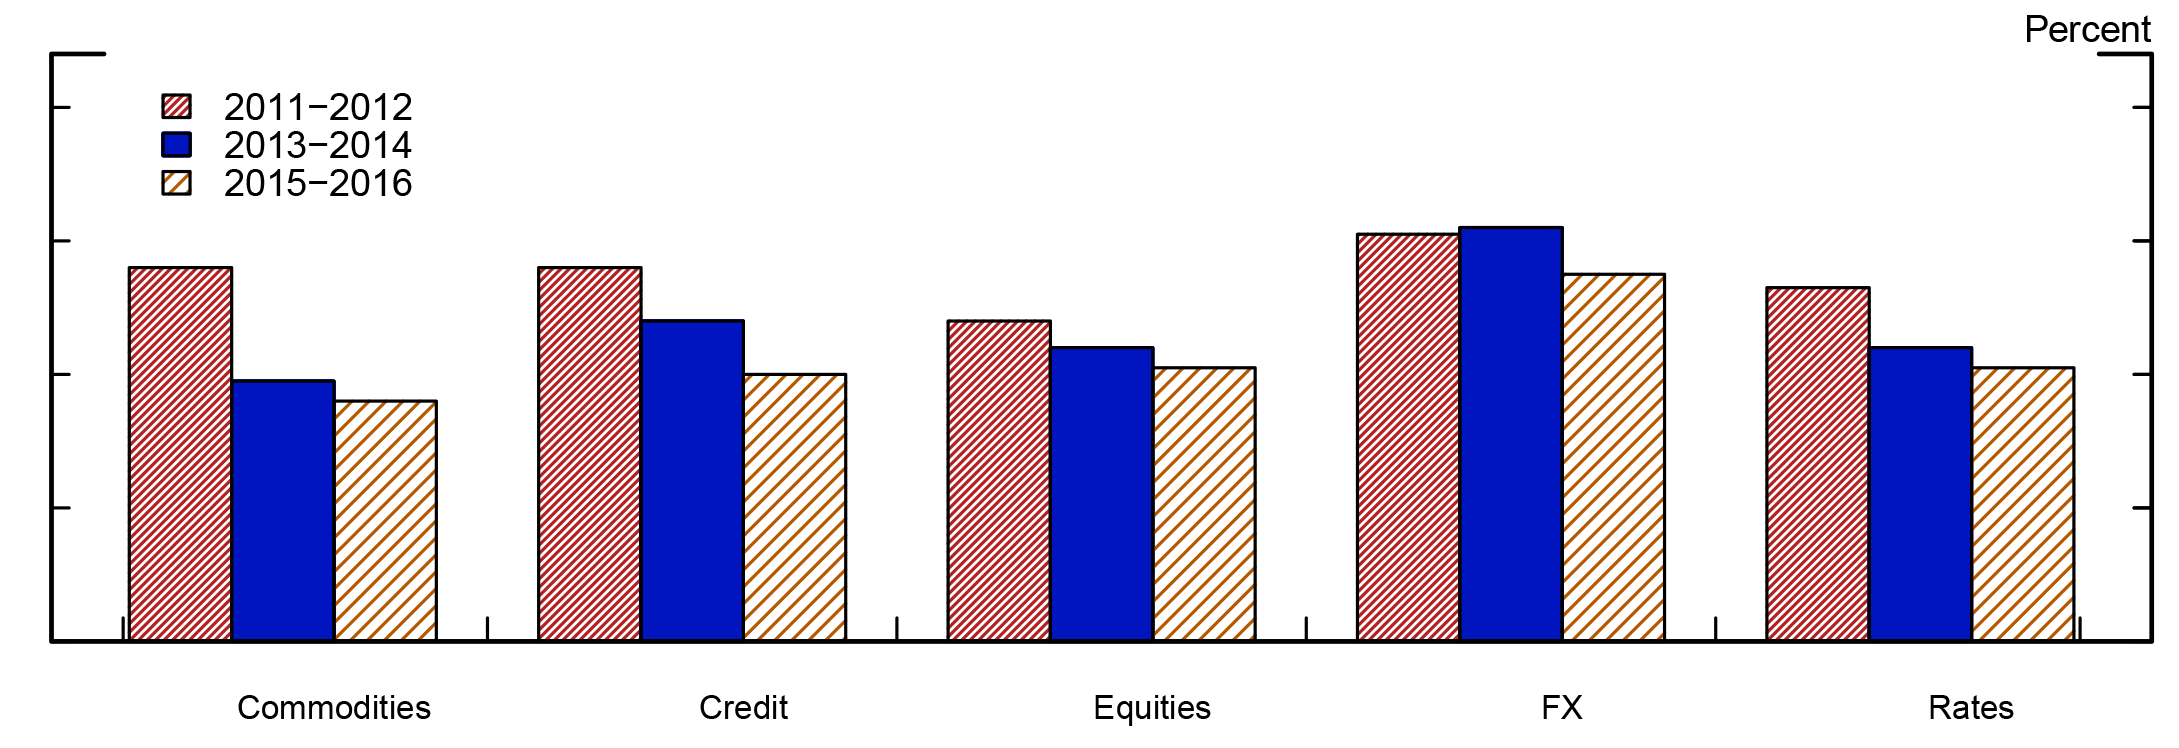 Figure 2: Percentage of total variance explained by the first two principal components